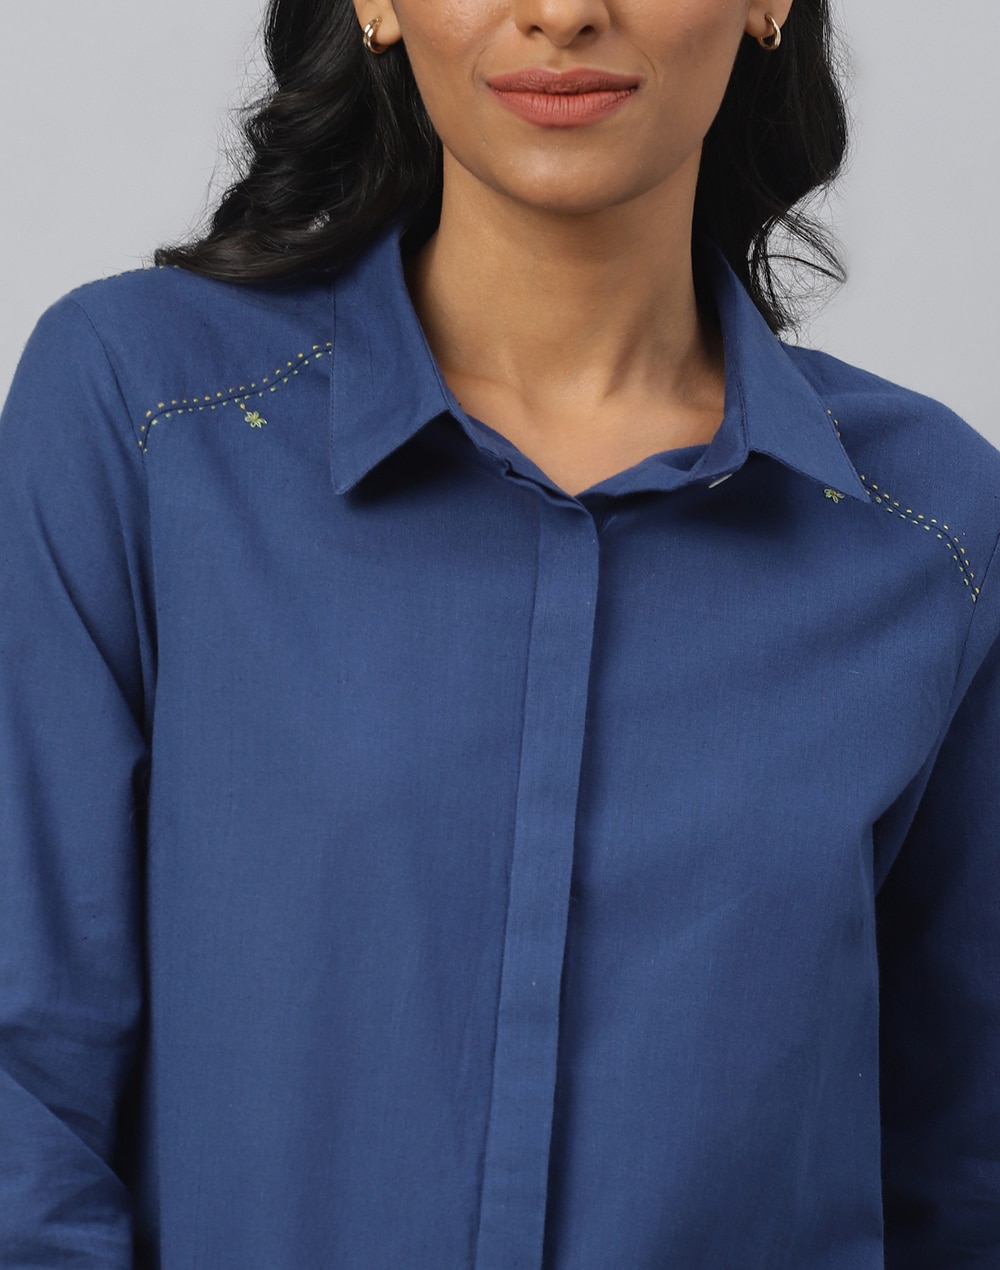 Buy Cotton Front Button Down Shirt for Women Online at Fabindia